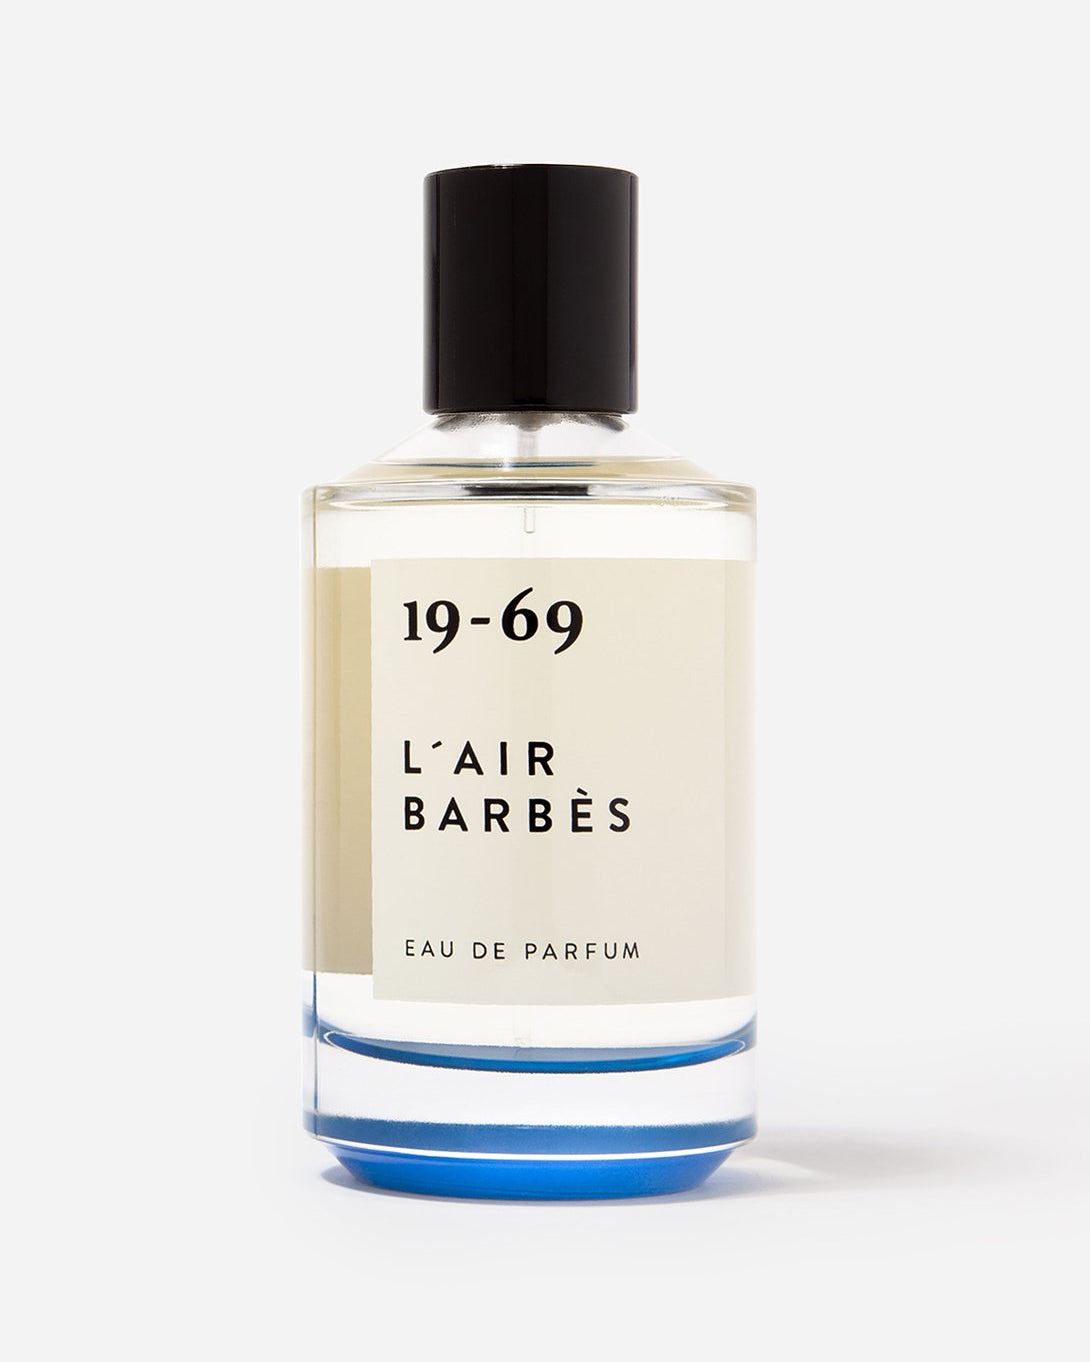 L'AIR BARBES perfume for men and women unisex l'air barbes 100ml 19-69